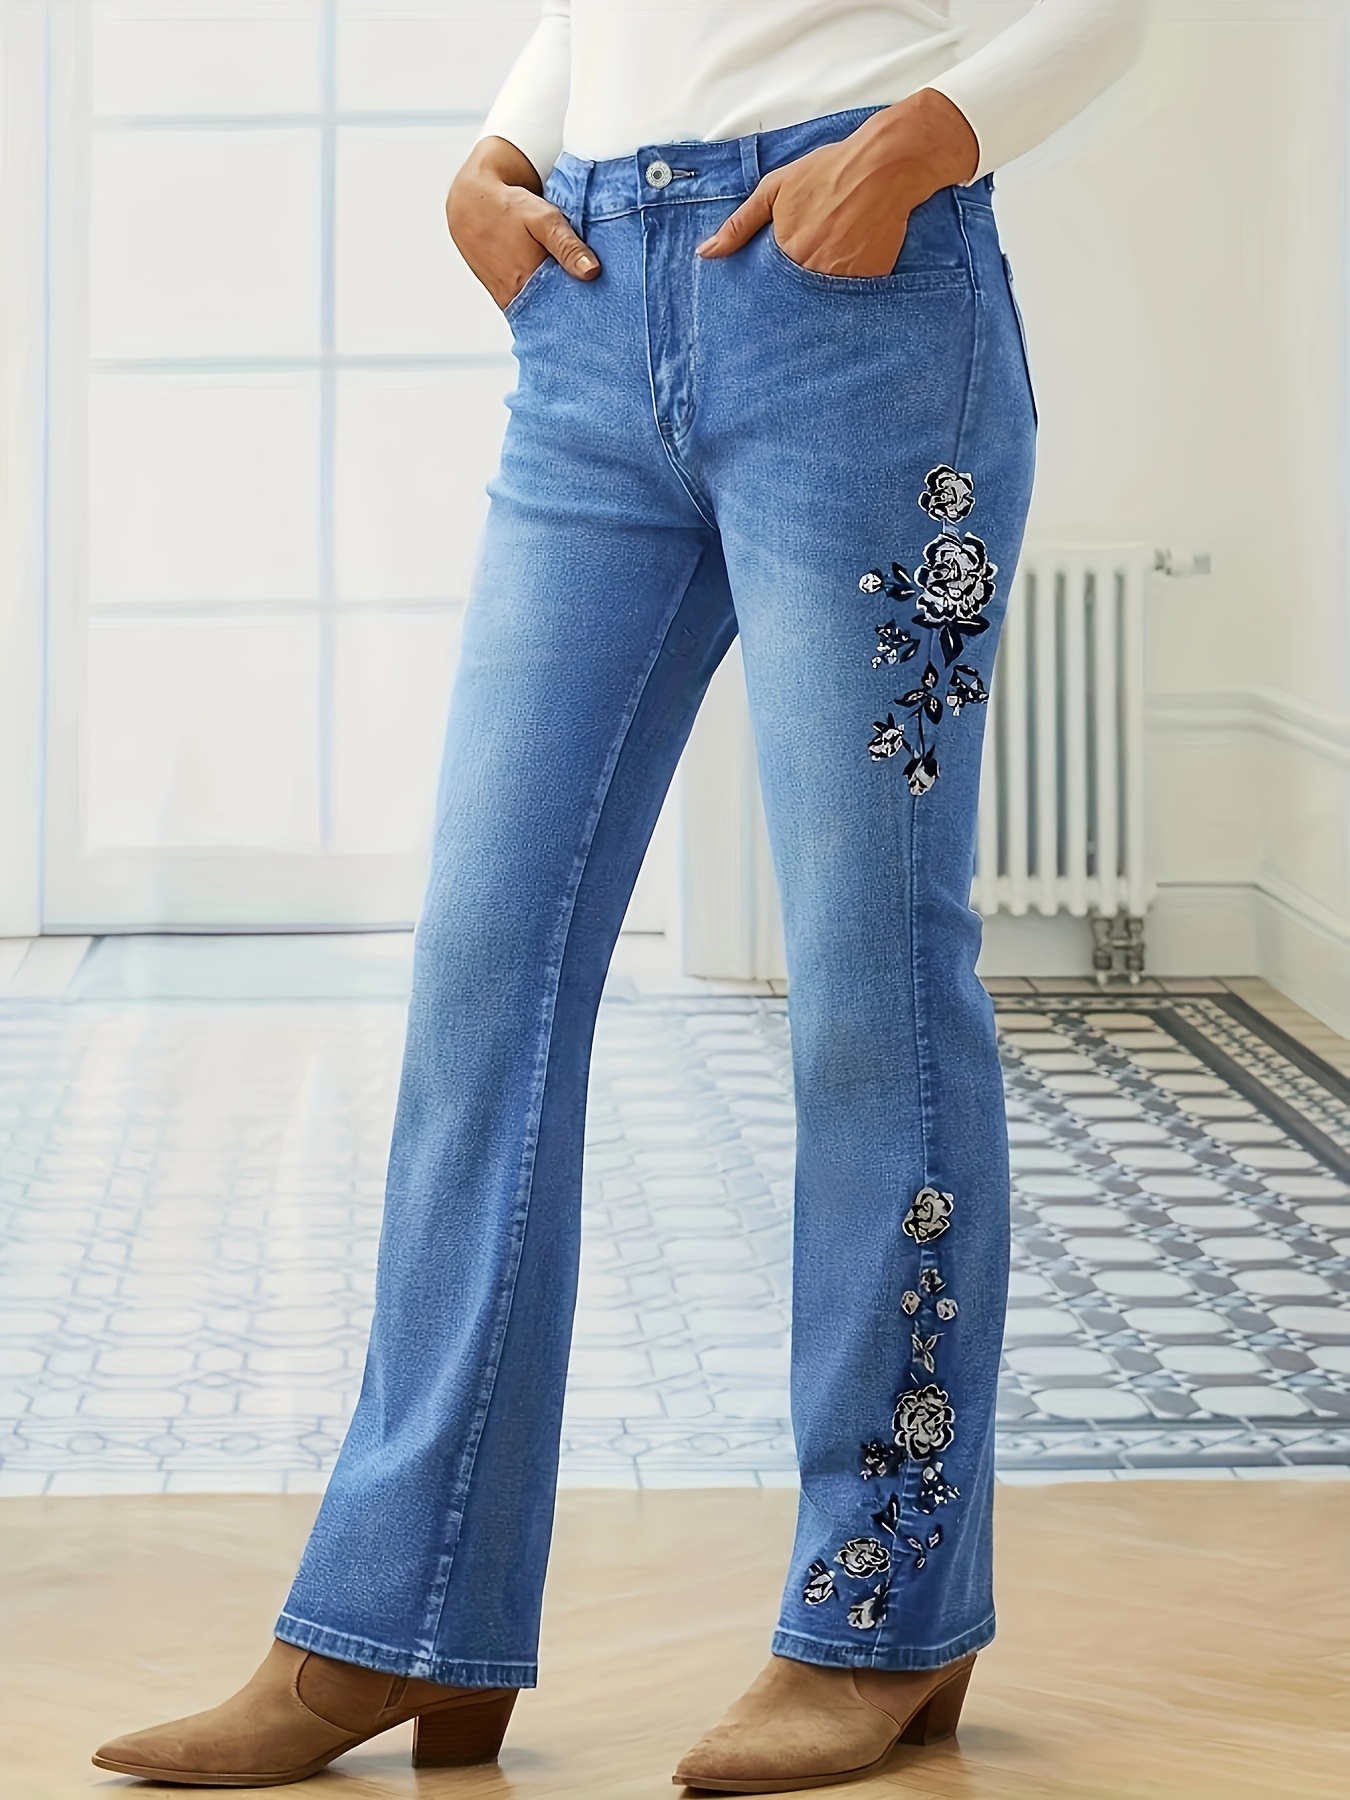 Blue Floral Embroidered Flare Jeans, High Waist Slant Pockets High Stretch  Bell Bottom Jeans, Women's Denim Jeans & Clothing